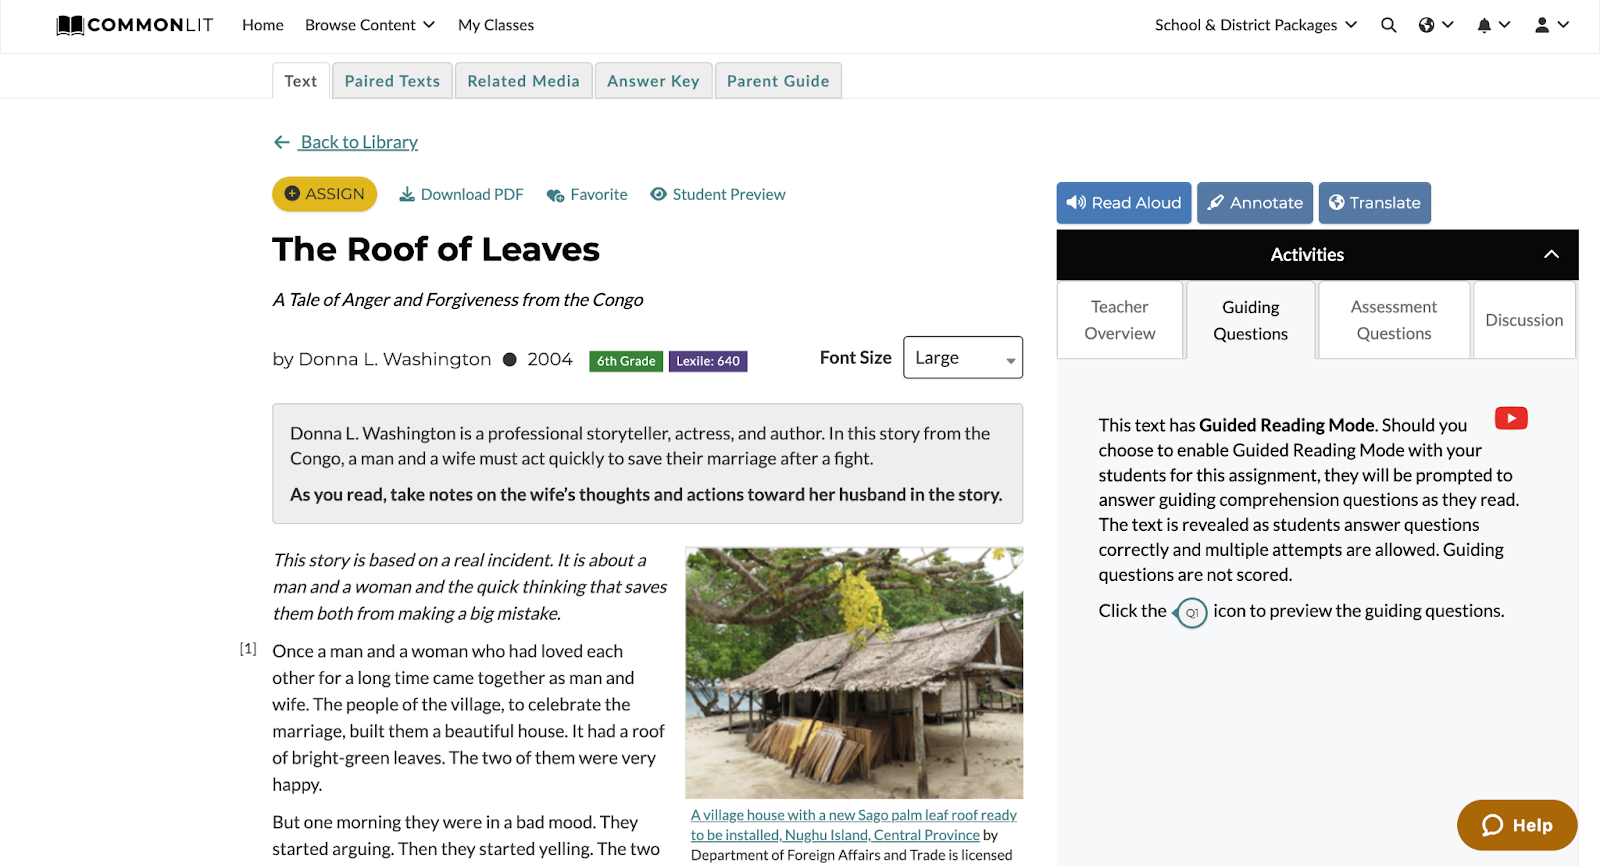 CommonLit lesson for “The Roof of Leaves” by Donna L. Washington with the Guided Questions tab highlighted.